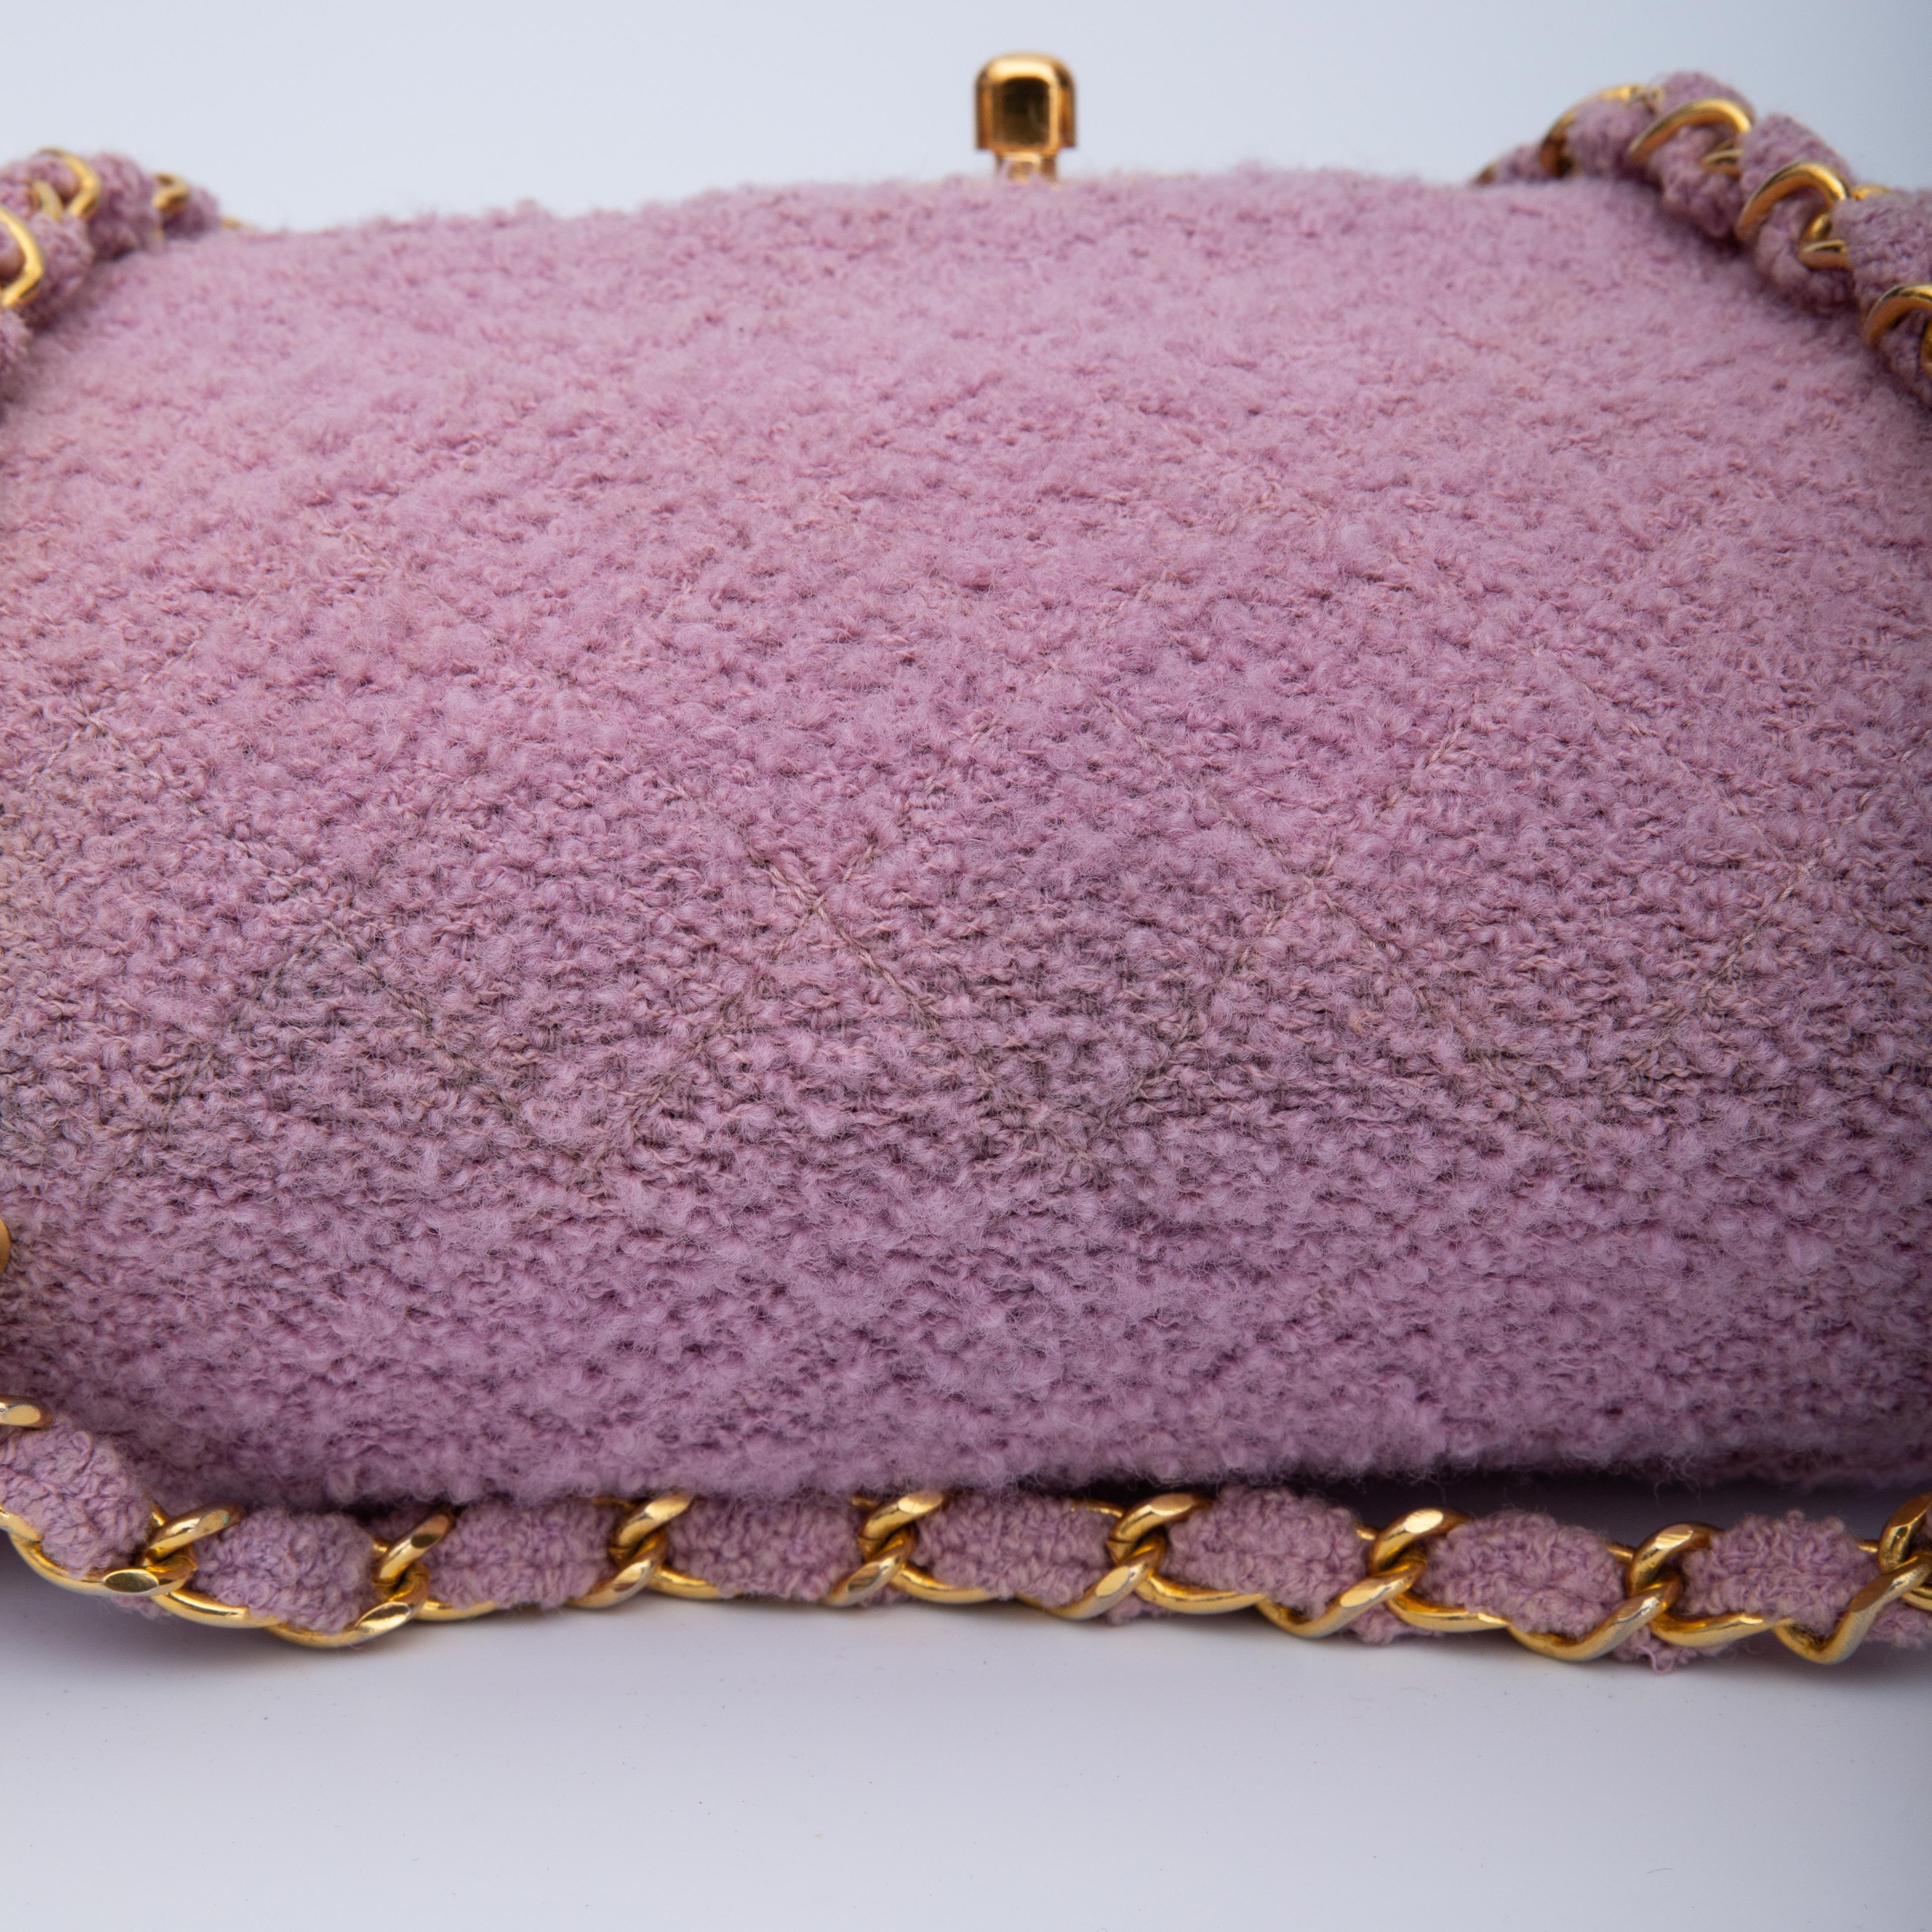 Women's or Men's Chanel Vintage Small Pink Tweed Classic Single Flap Bag (2014)